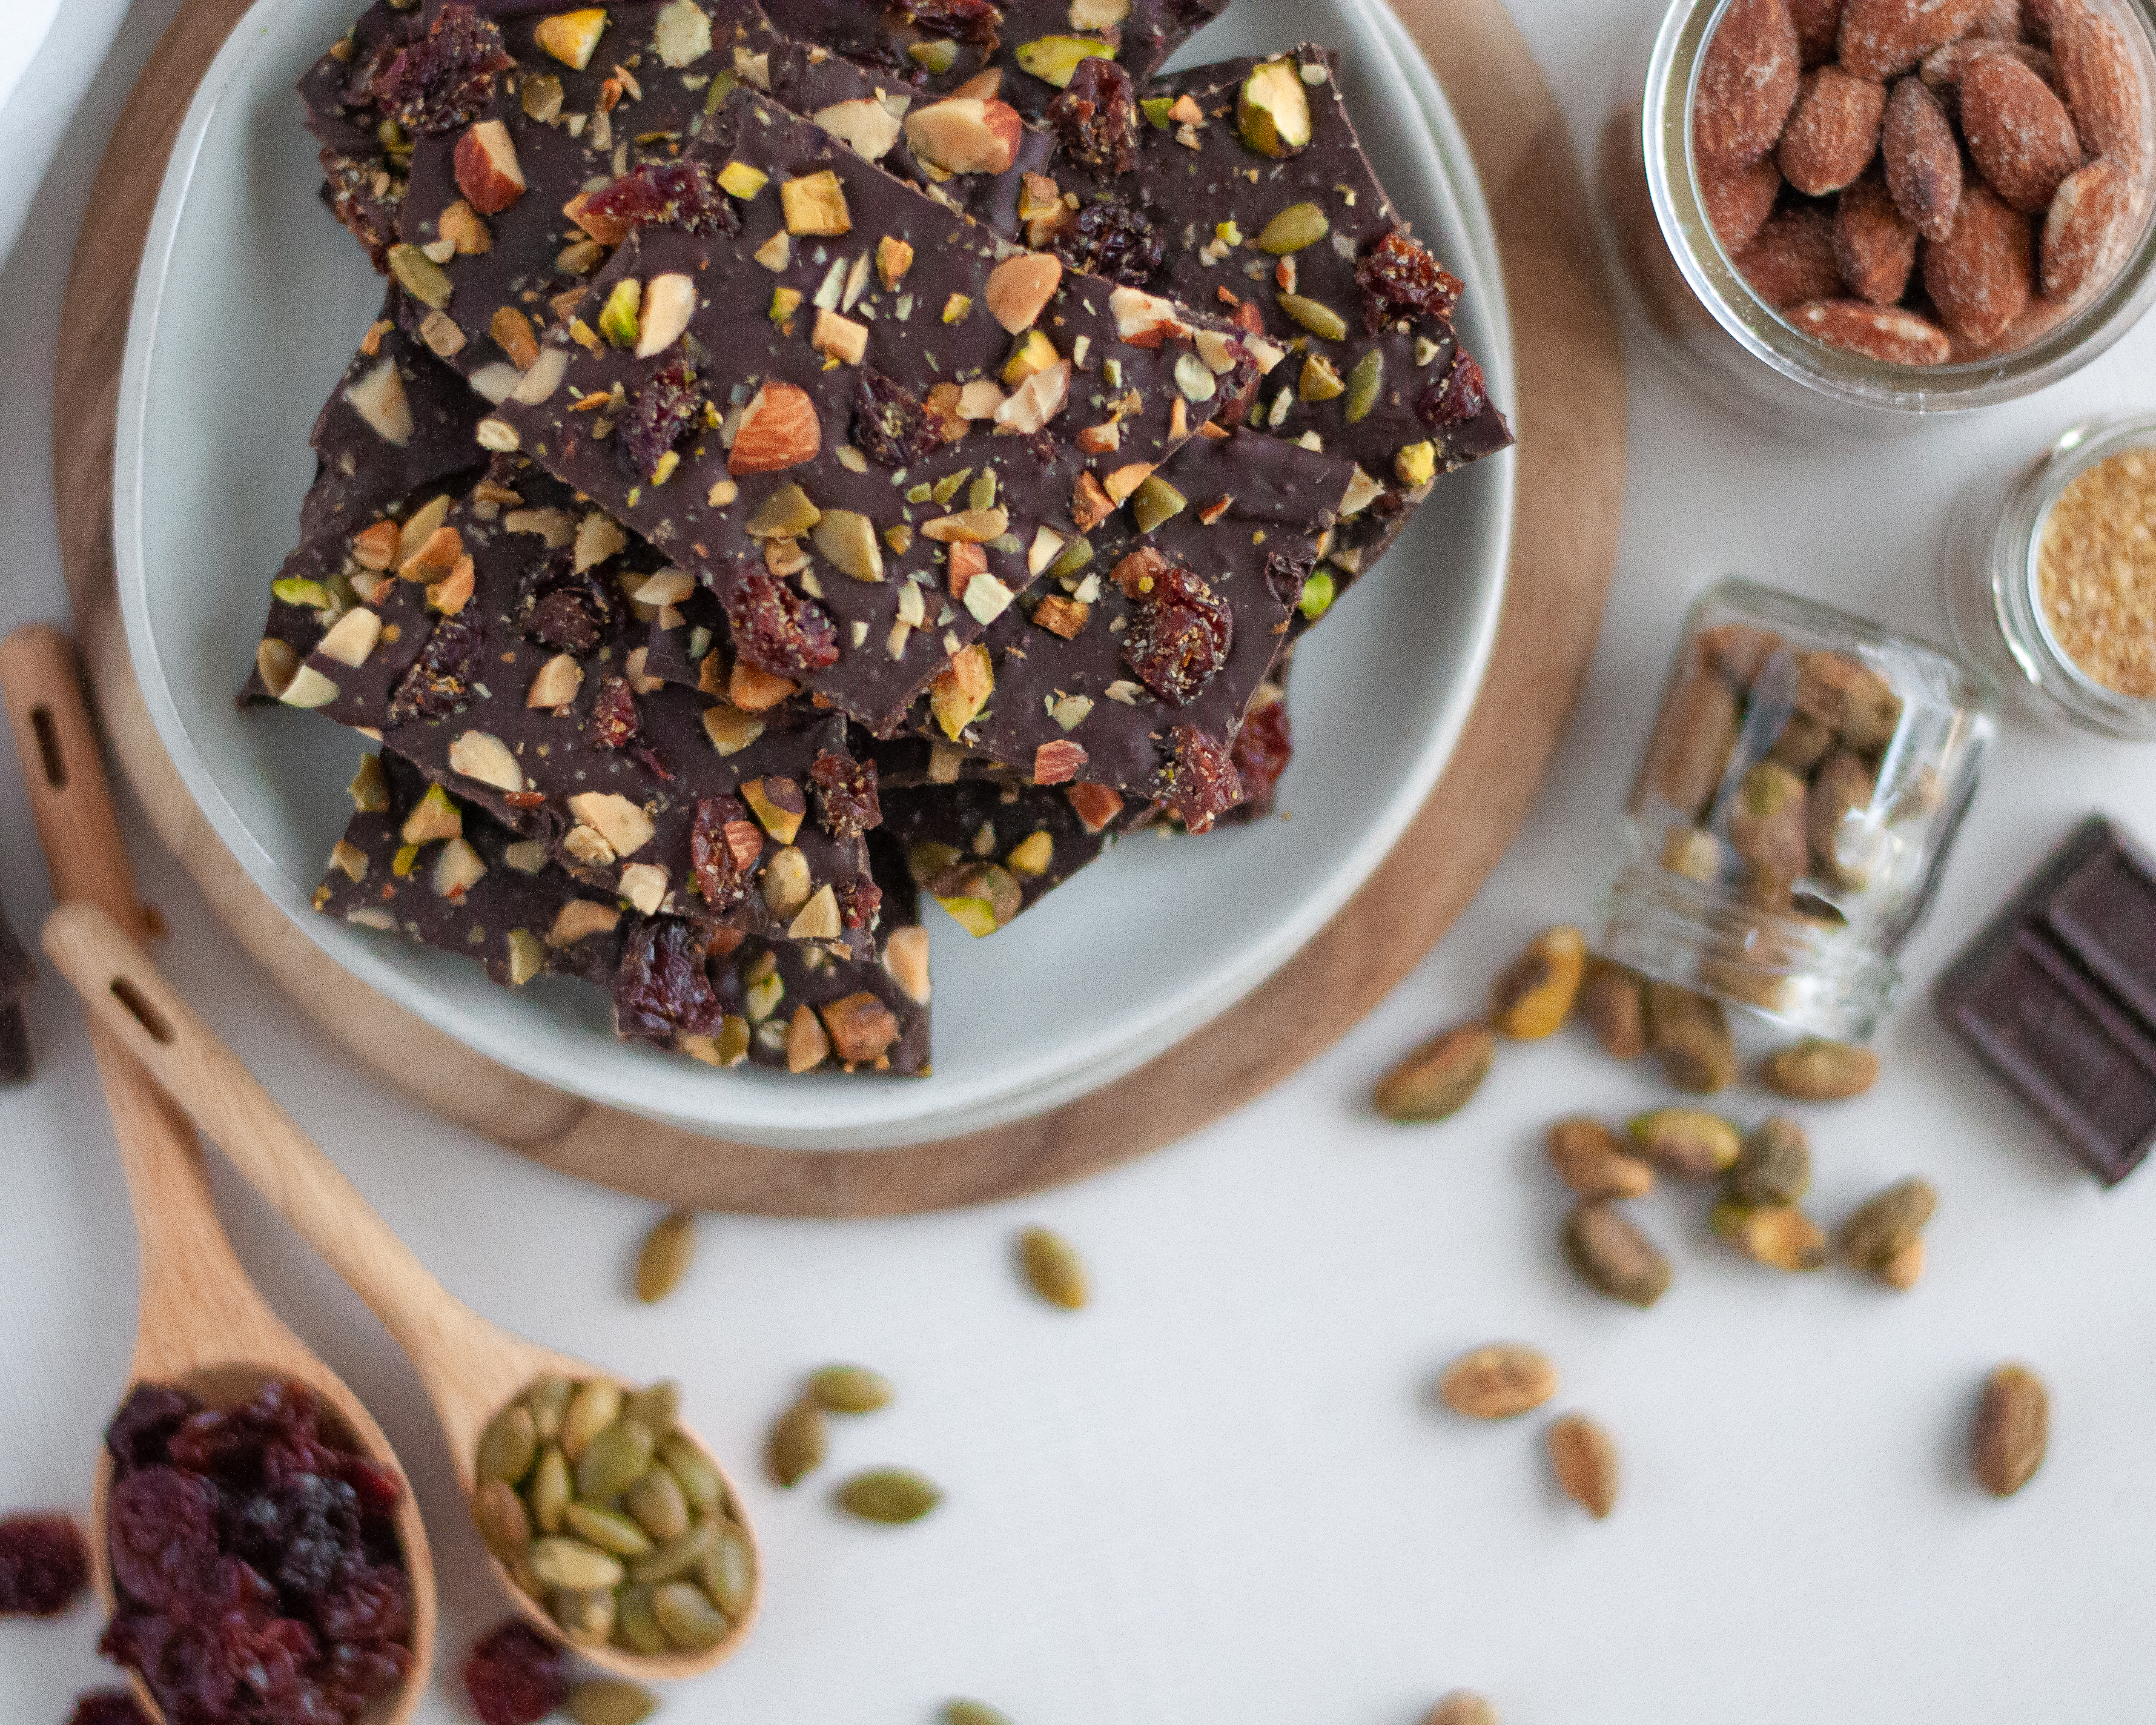 Top down view of a plate of dark chocolate bark with fruit and nuts, surrounded by the ingredients for chocolate bark: chocolate, ground flax, almonds, pistachios, pepitas, and cherries.